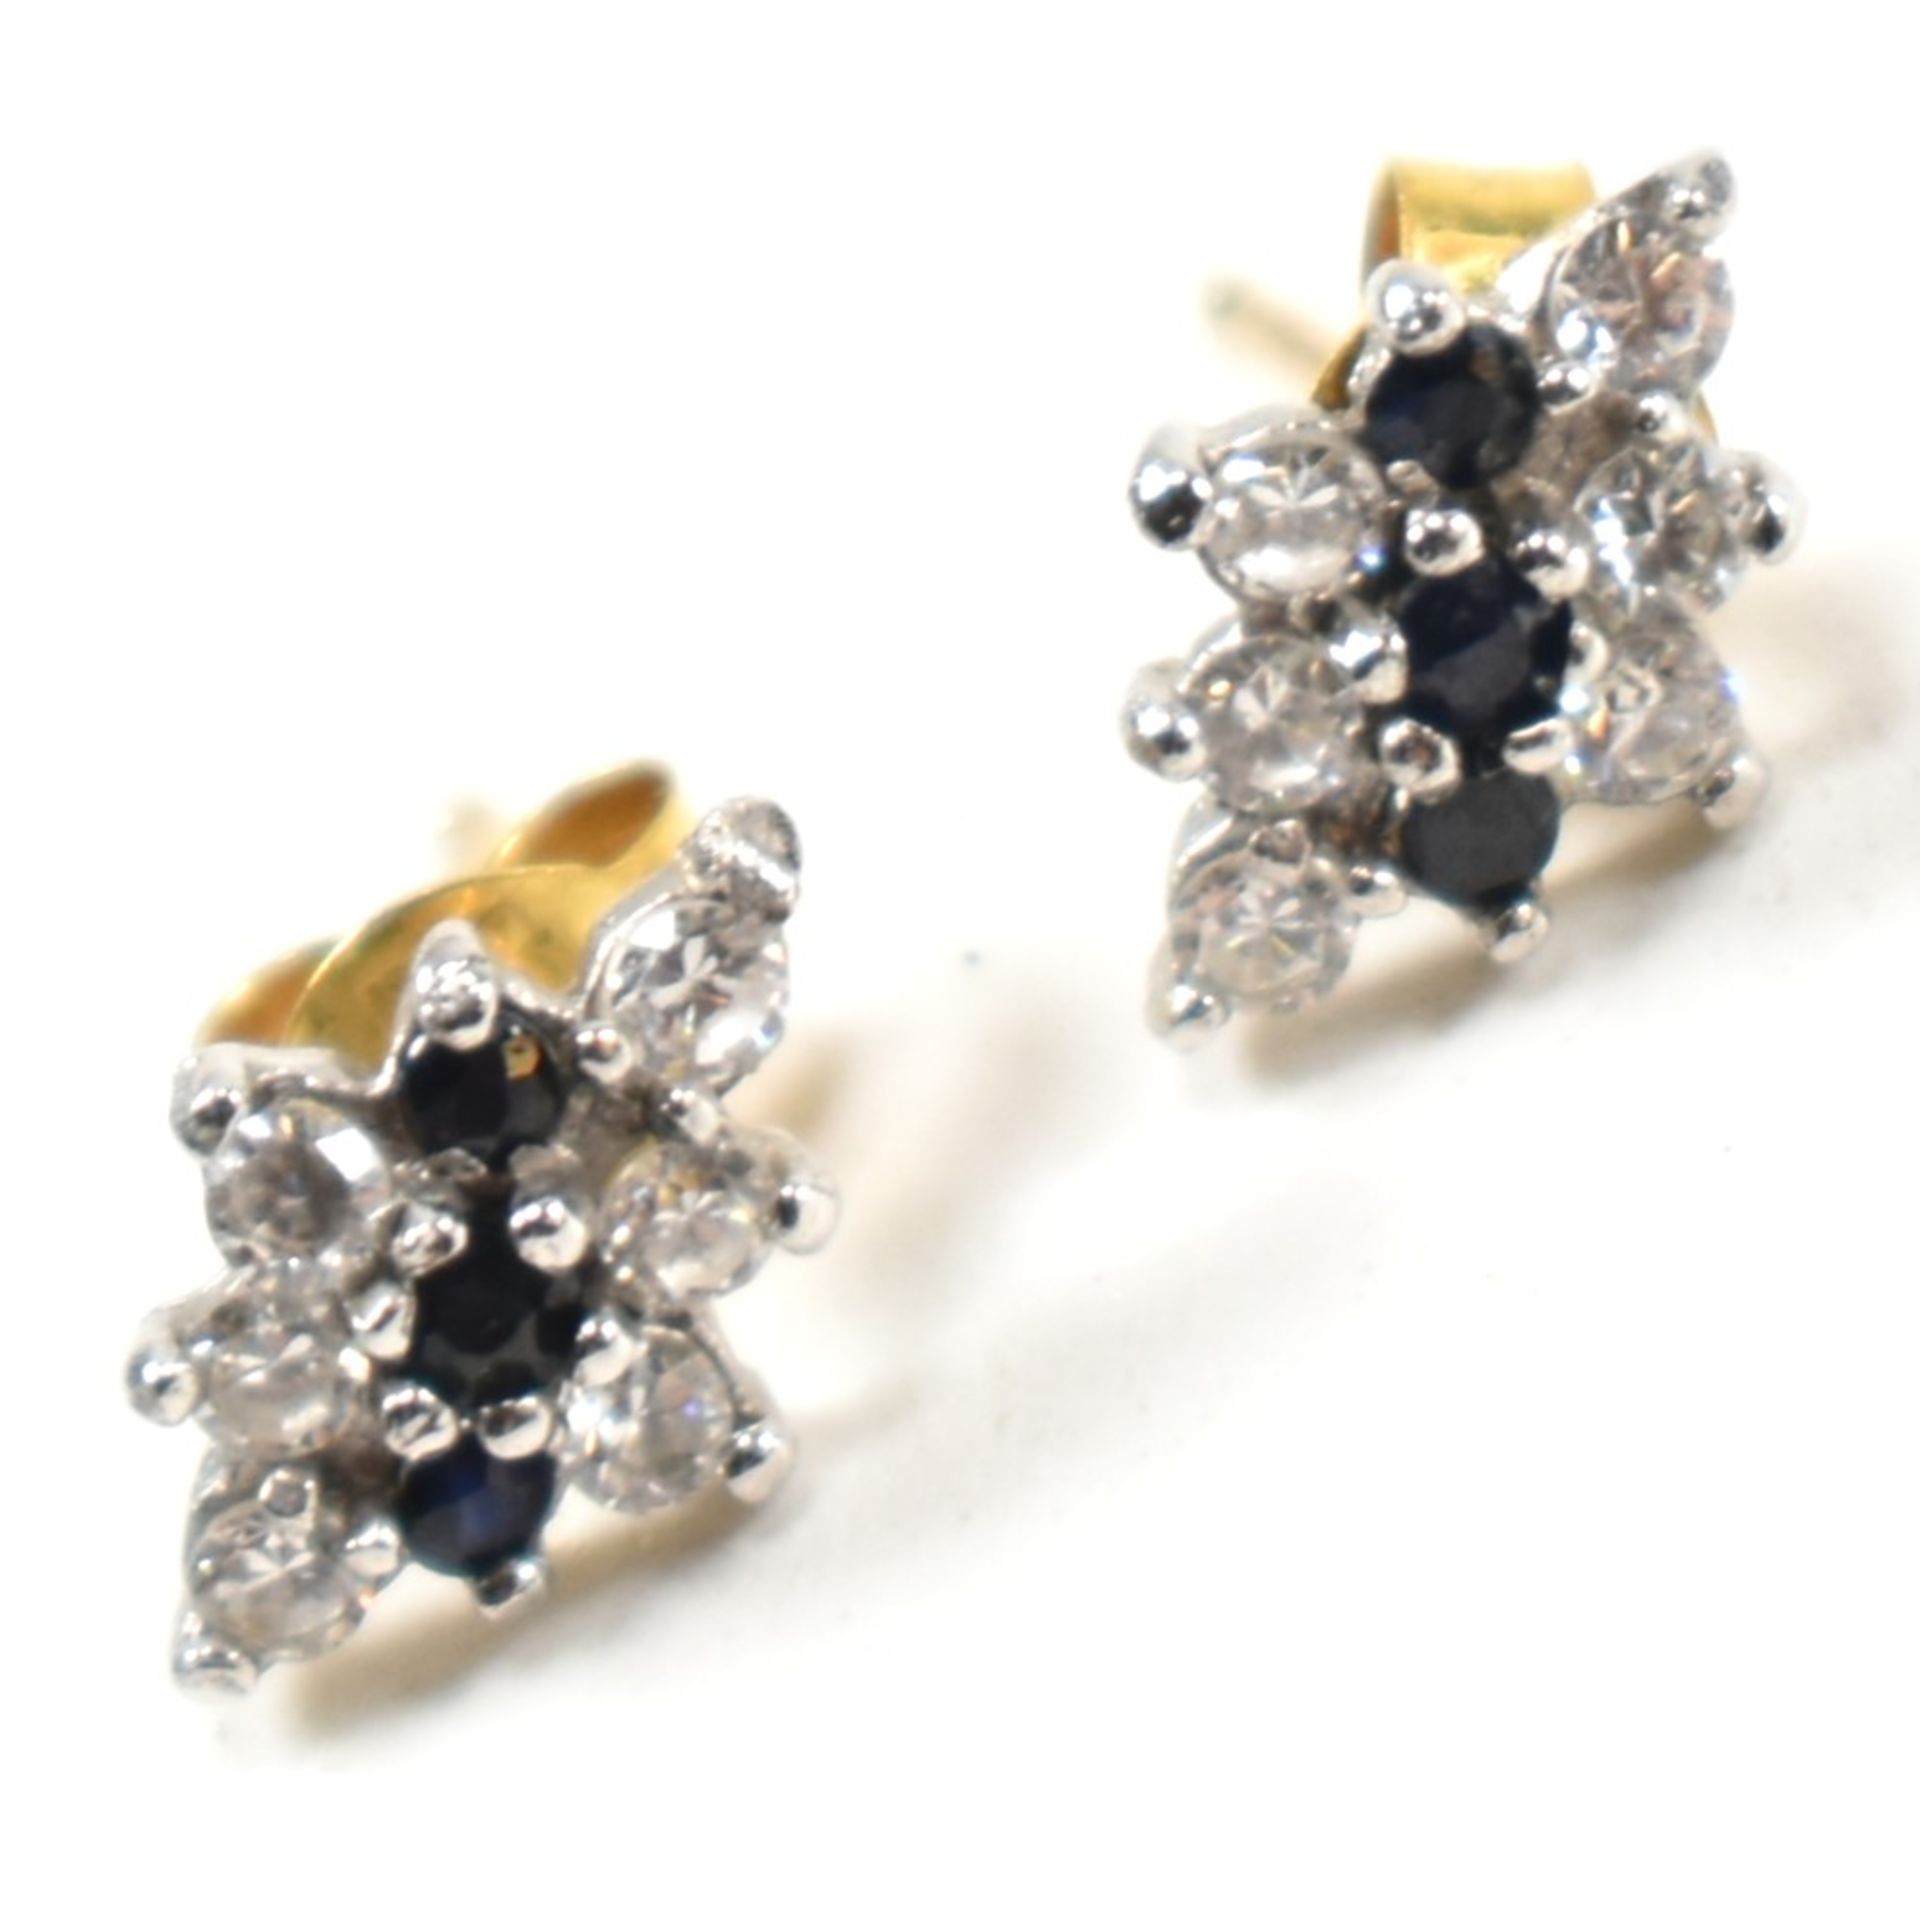 FOUR PAIRS OF 9CT GOLD & GEM SET STUD EARRINGS - Image 3 of 6